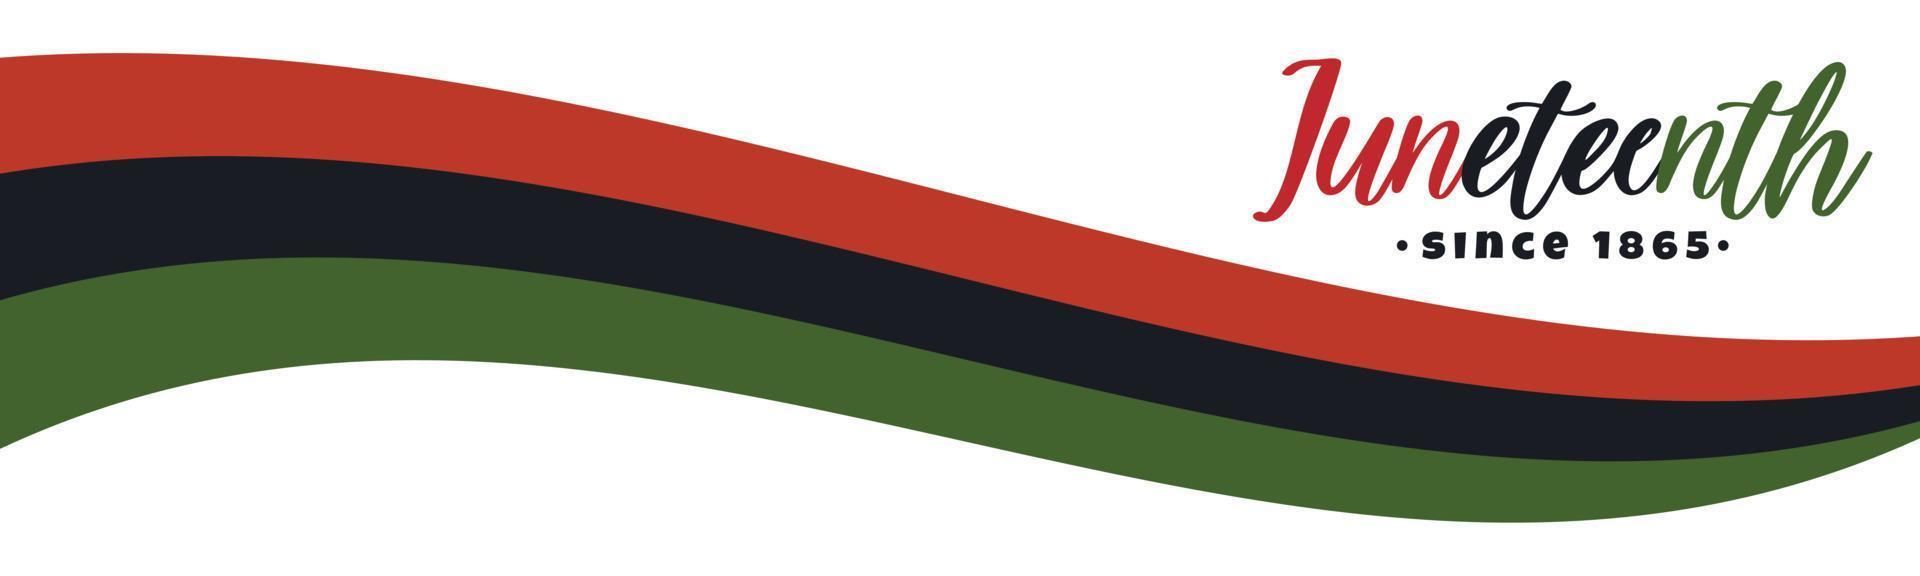 Juneteenth, since 1865 text lettering logo. Horizontal banner design with Pan African, Black Liberation flag with red, black, green stripes.. Vector illustration isolated on white background,